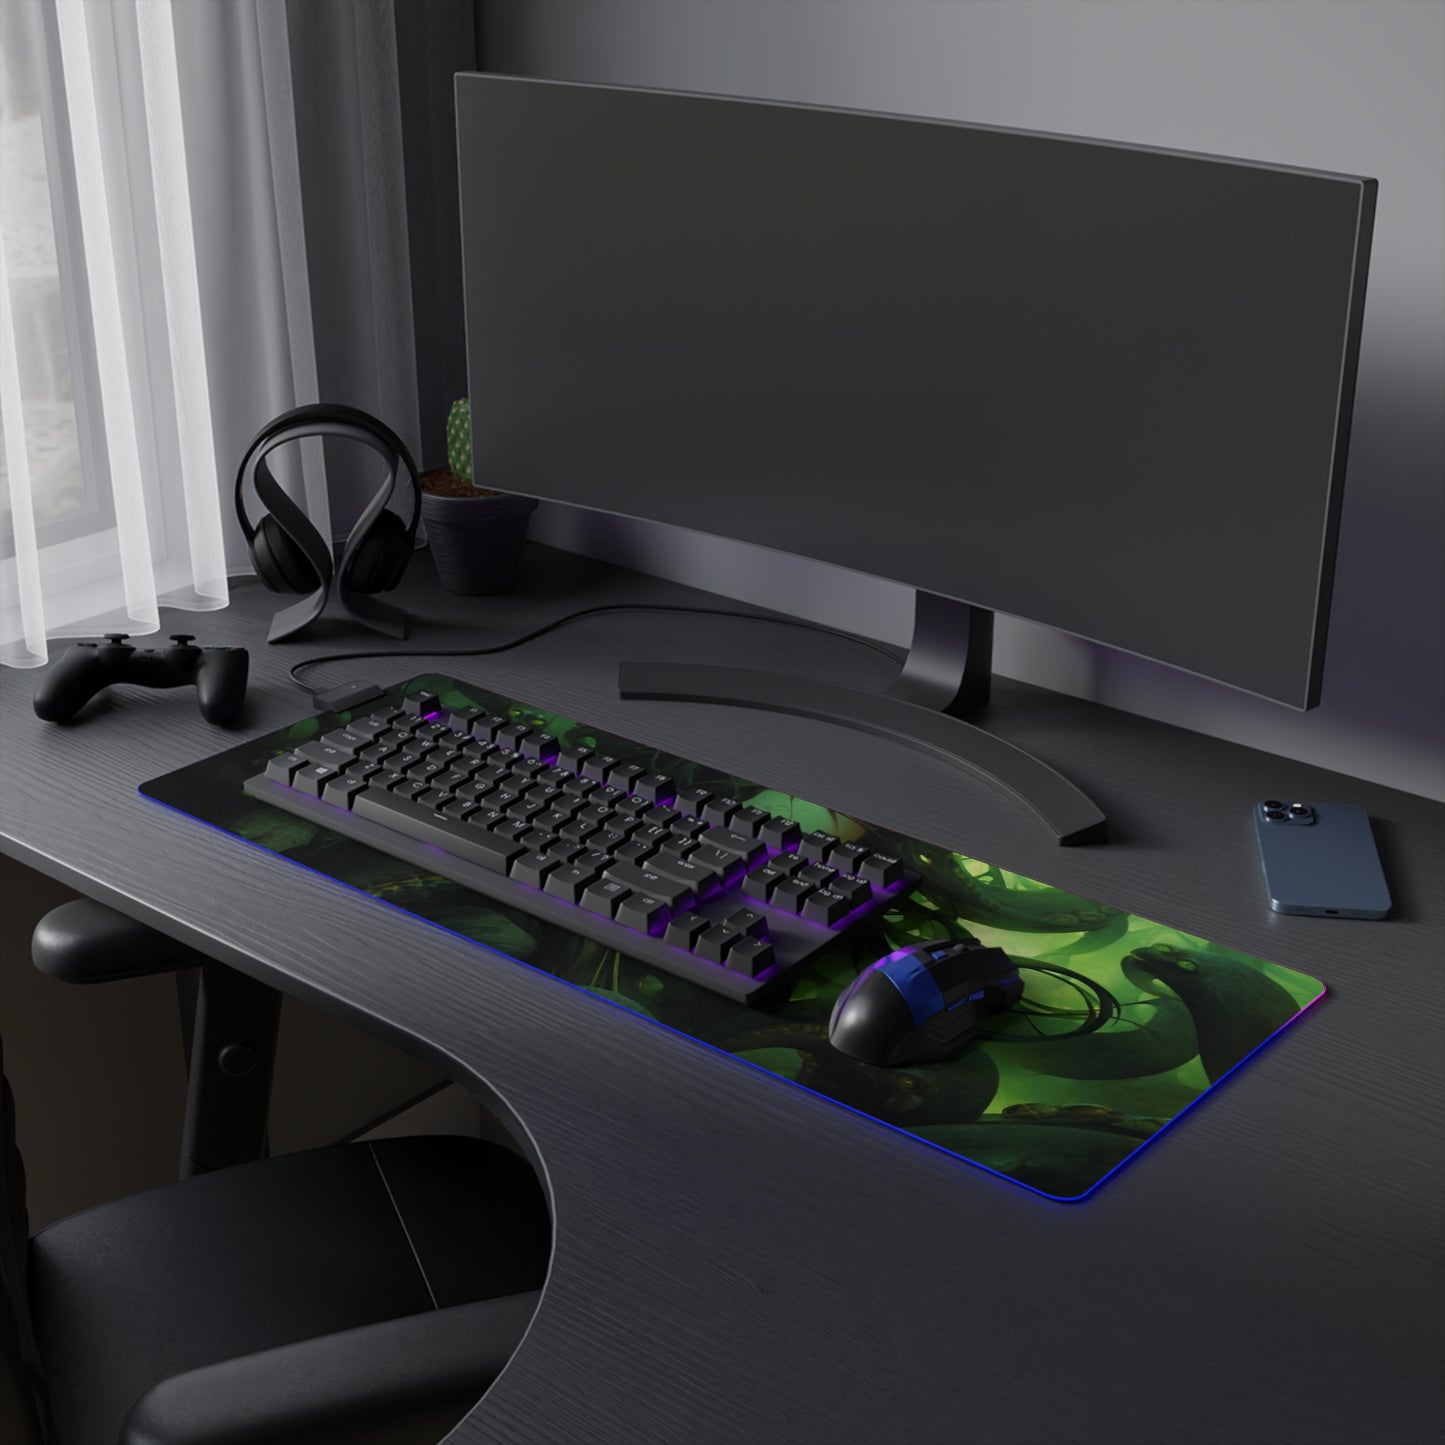 Jade Serpent-1 LED Gaming Mouse Pad